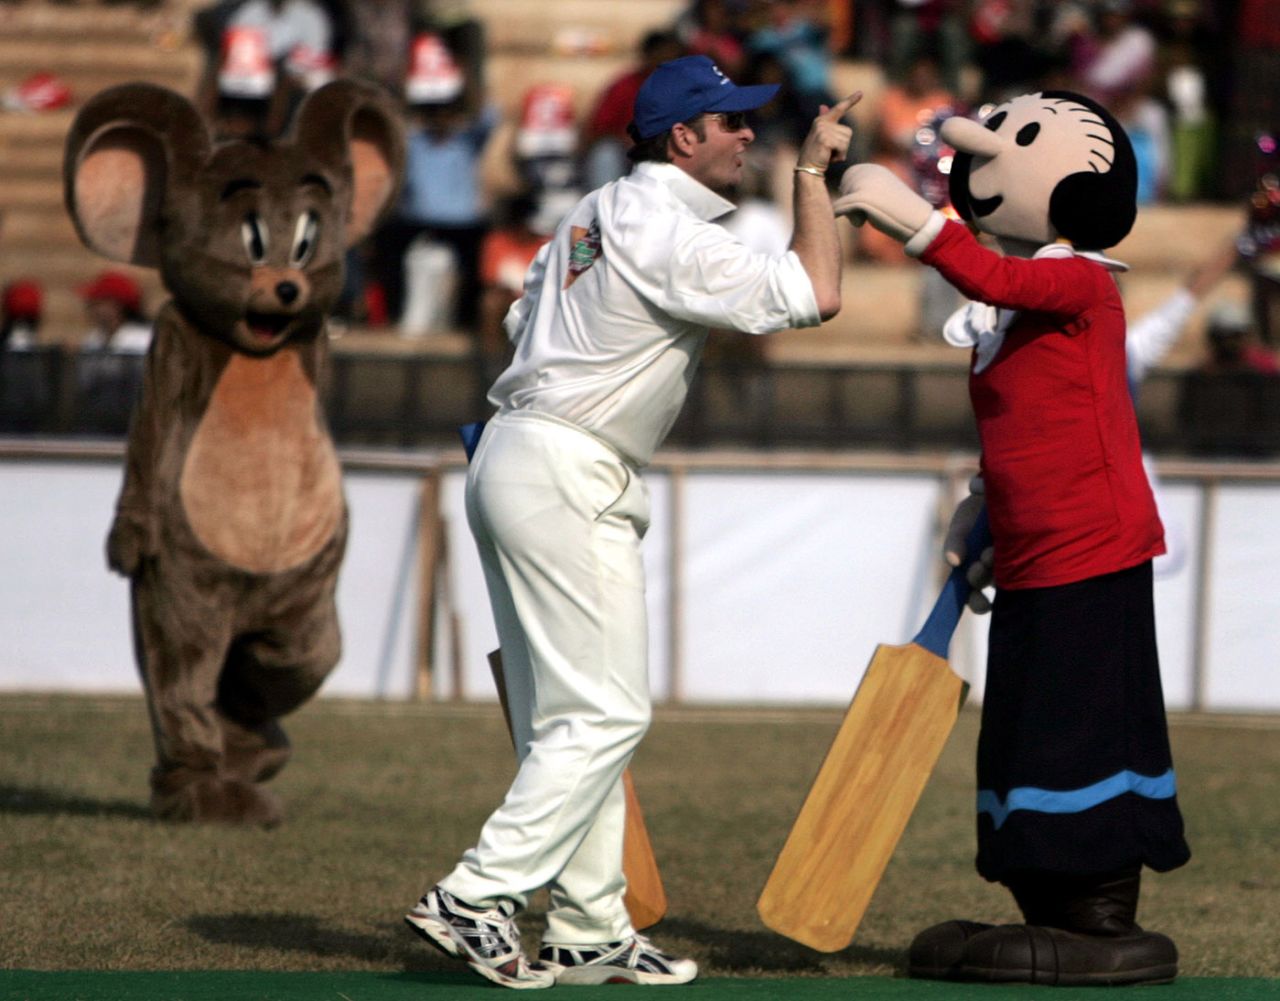 Mark Waugh has an argument with his batting partner Olive Oyl while Jerry the Mouse looks on, Mumbai, December 4, 2005